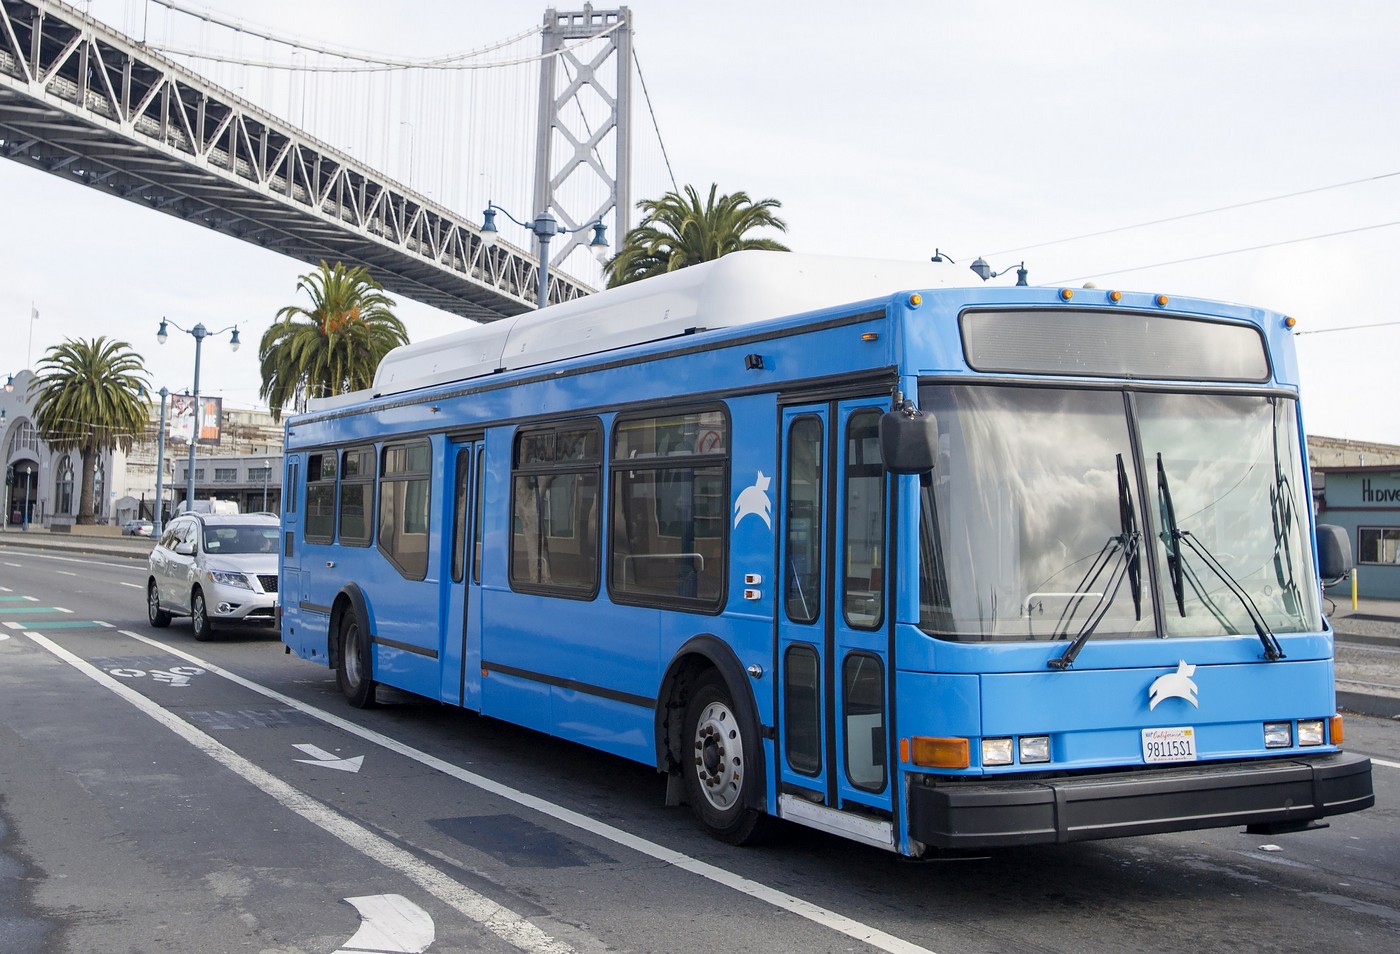 A Leap Transit bus drives passes under the Bay Bridge in San Francisco, California on March 23, 2015. Leap Transit's fleet of natural gas-powered luxury buses started their first route through the city this week, offering riders a new high-tech alternative to tightly packed city buses.  AFP PHOTO/JOSH EDELSON        (Photo credit should read Josh Edelson/AFP/Getty Images)